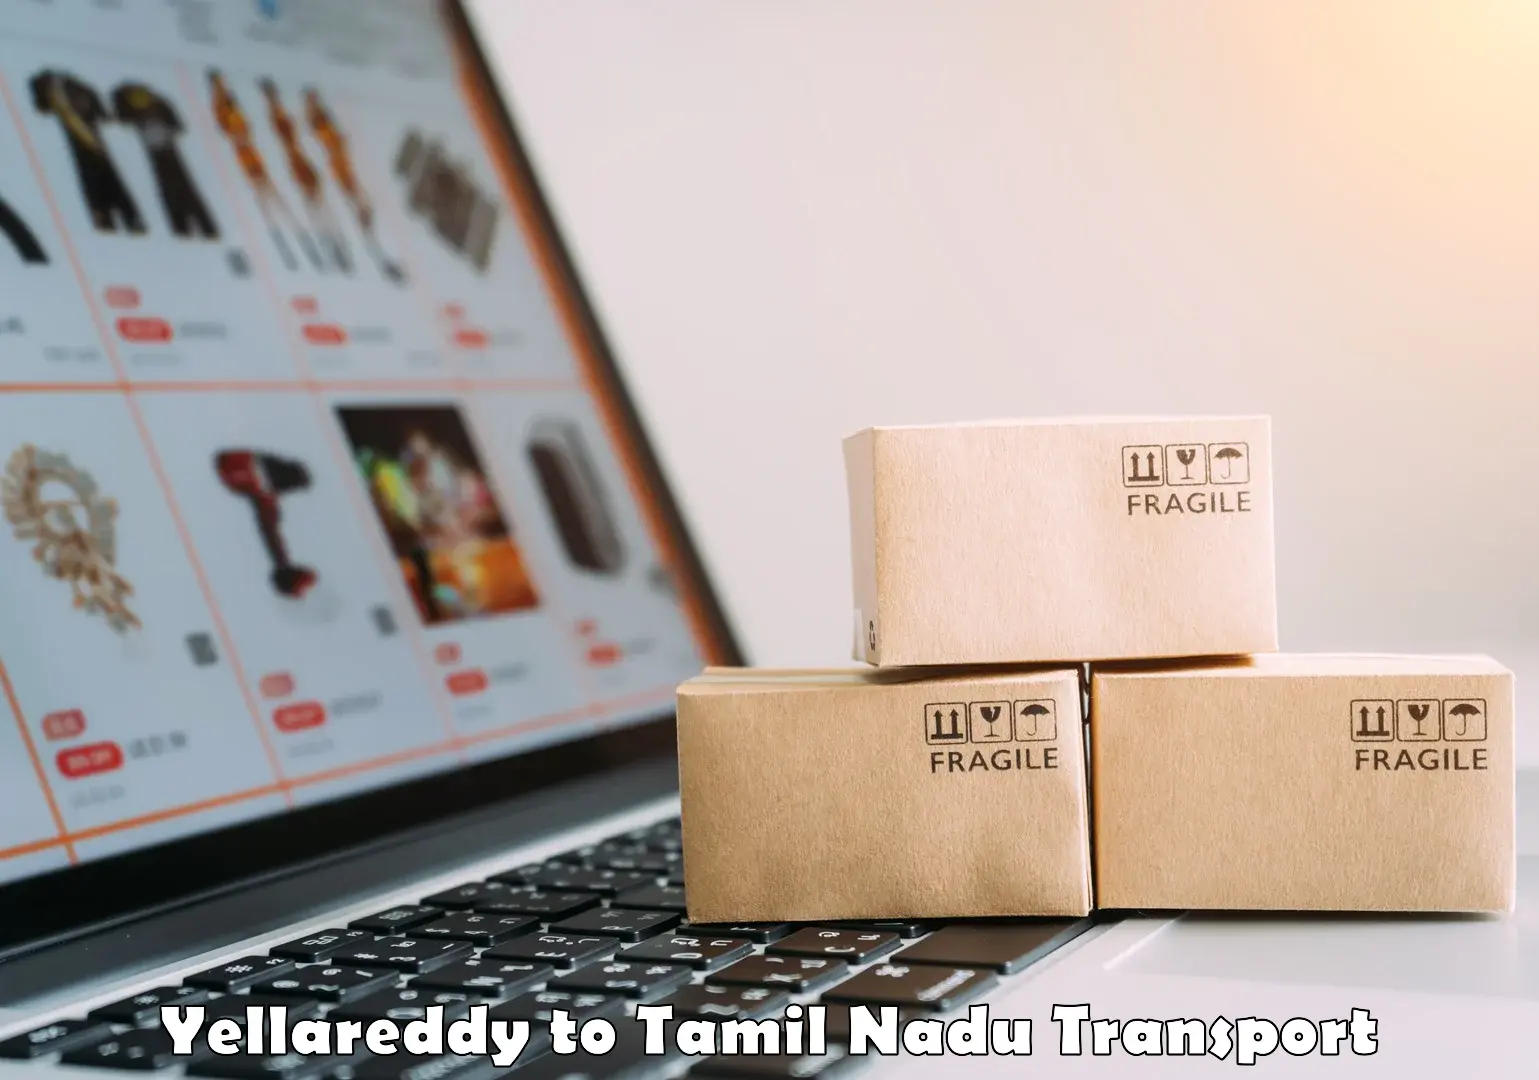 Container transport service Yellareddy to Melur